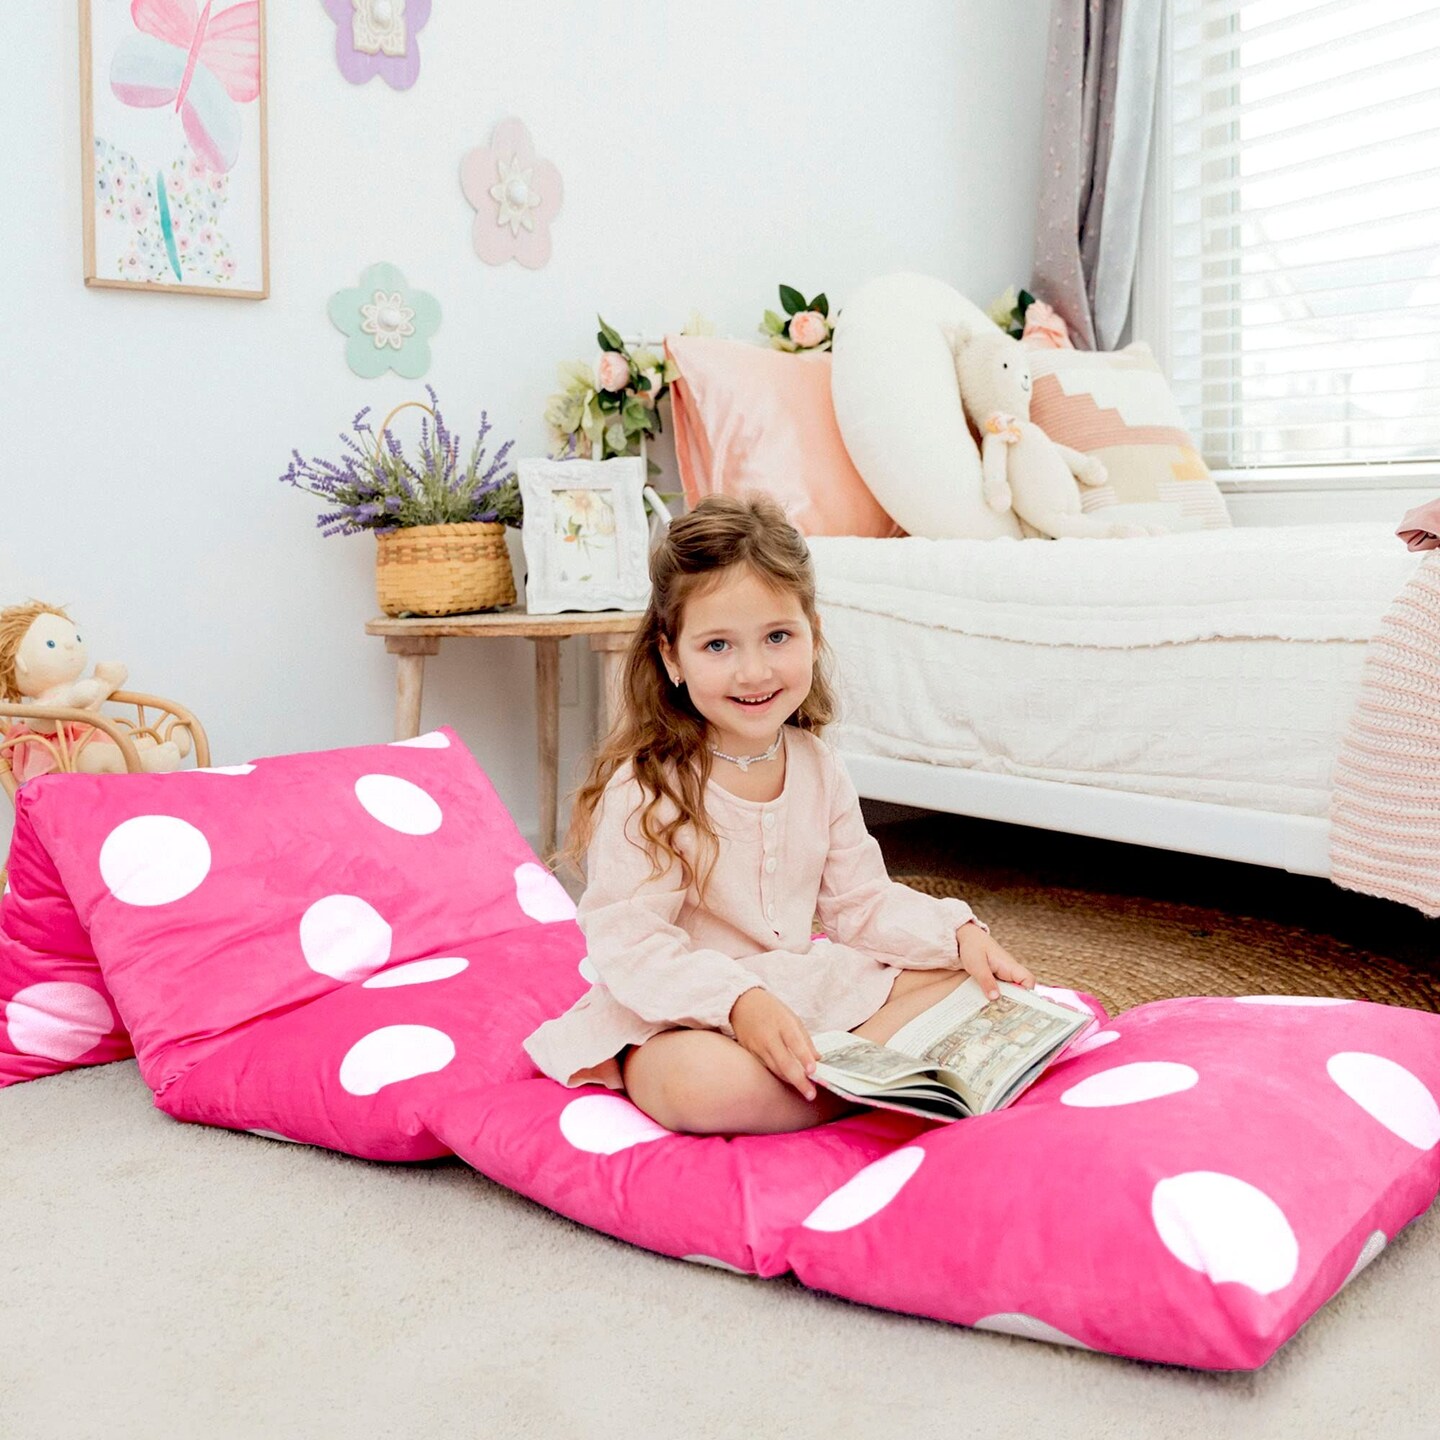 Butterfly Craze Floor Pillow Case, Mattress Bed Lounger Cover, Polka Hot Pink, King, Cozy Seating Solution for Kids &#x26; Adults, Recliner Cushion, for Reading, TV Time, Sleepovers, &#x26; Toddler Nap Mat